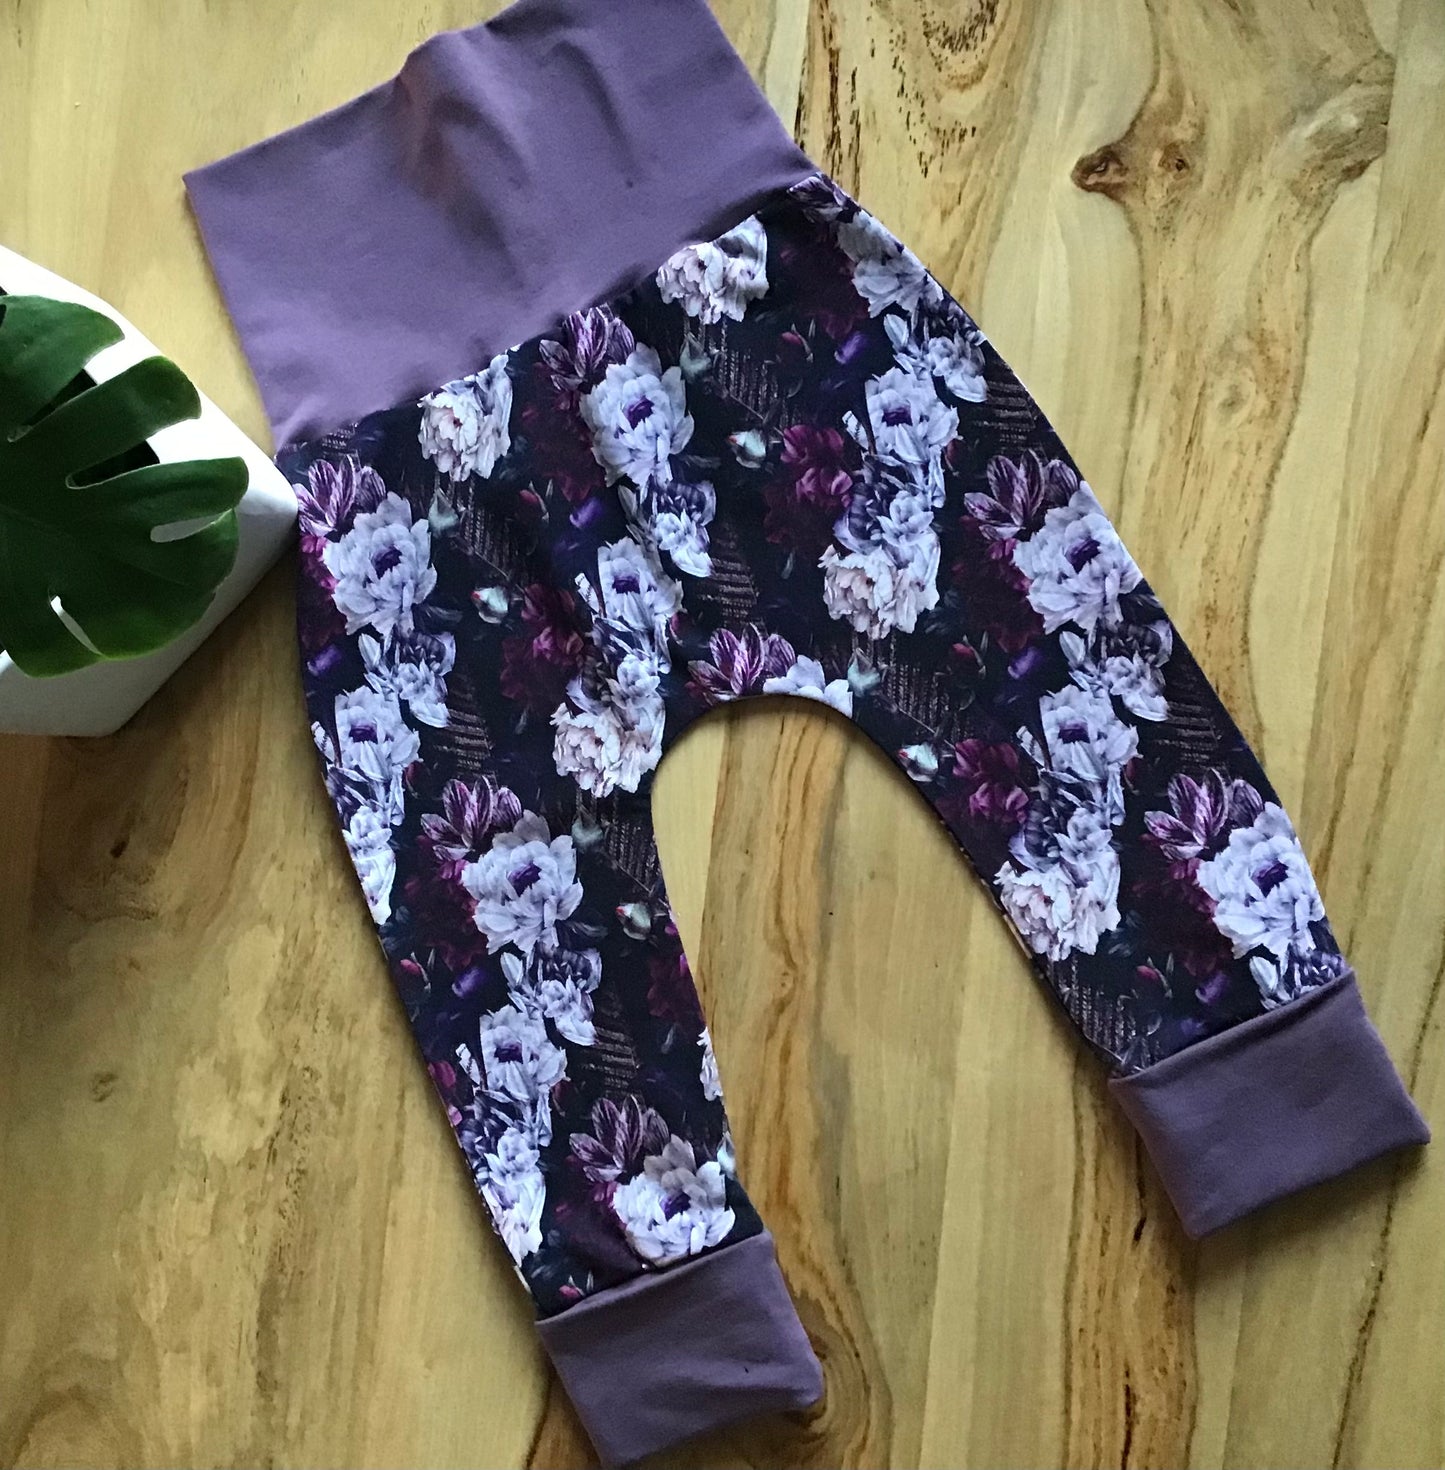 Scalable harem pants peonies gr: 6 to 36 months ready to leave